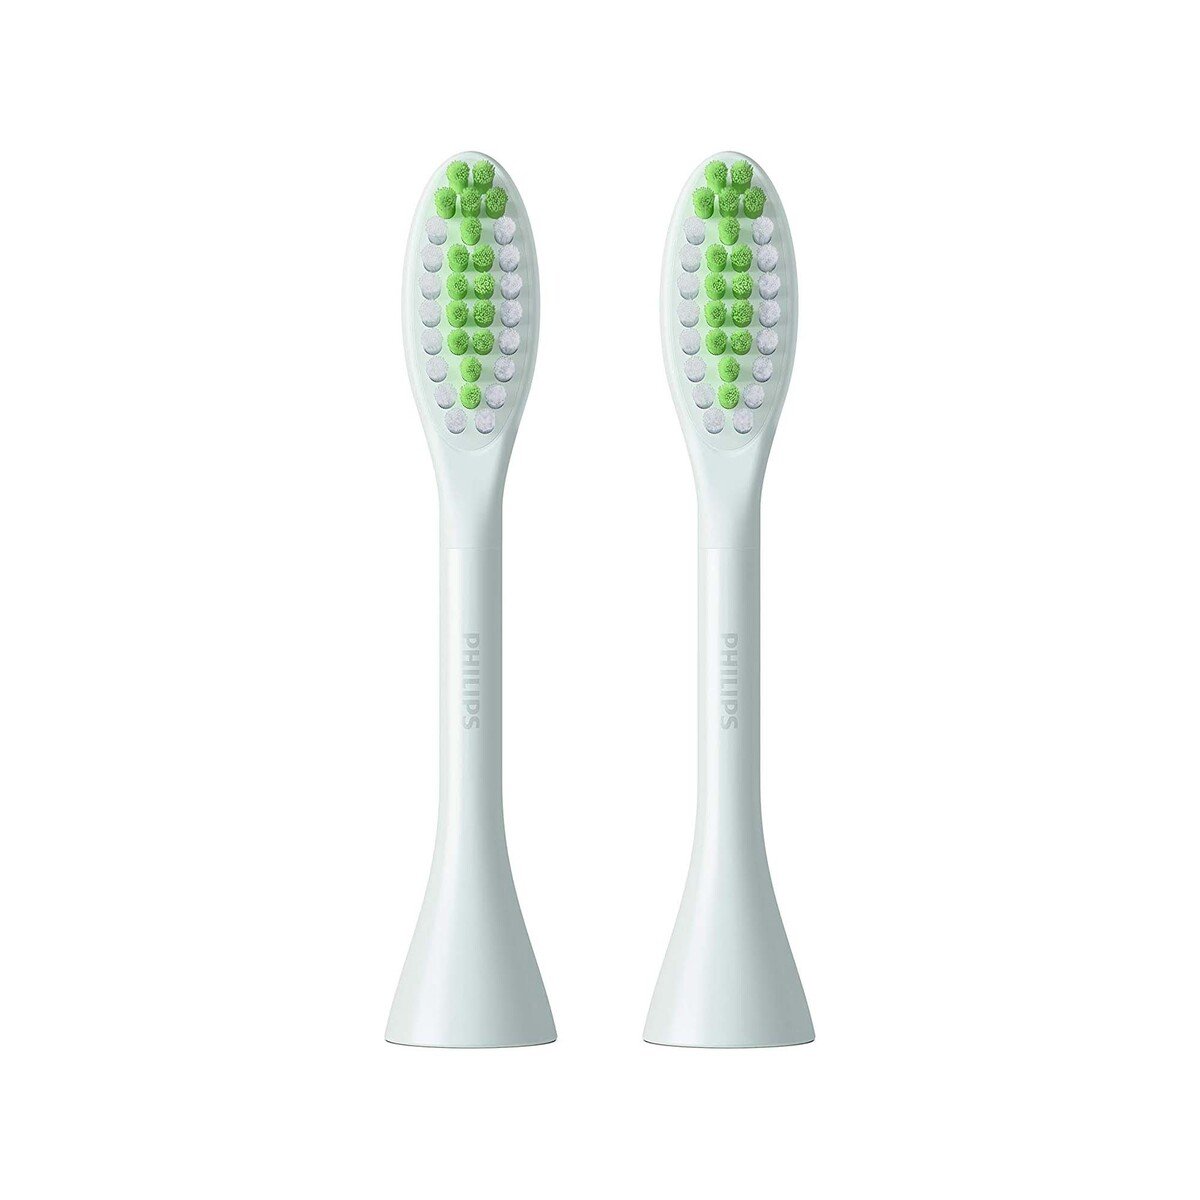 Philips One by Sonicare Brush head Mint Light Blue BH1022